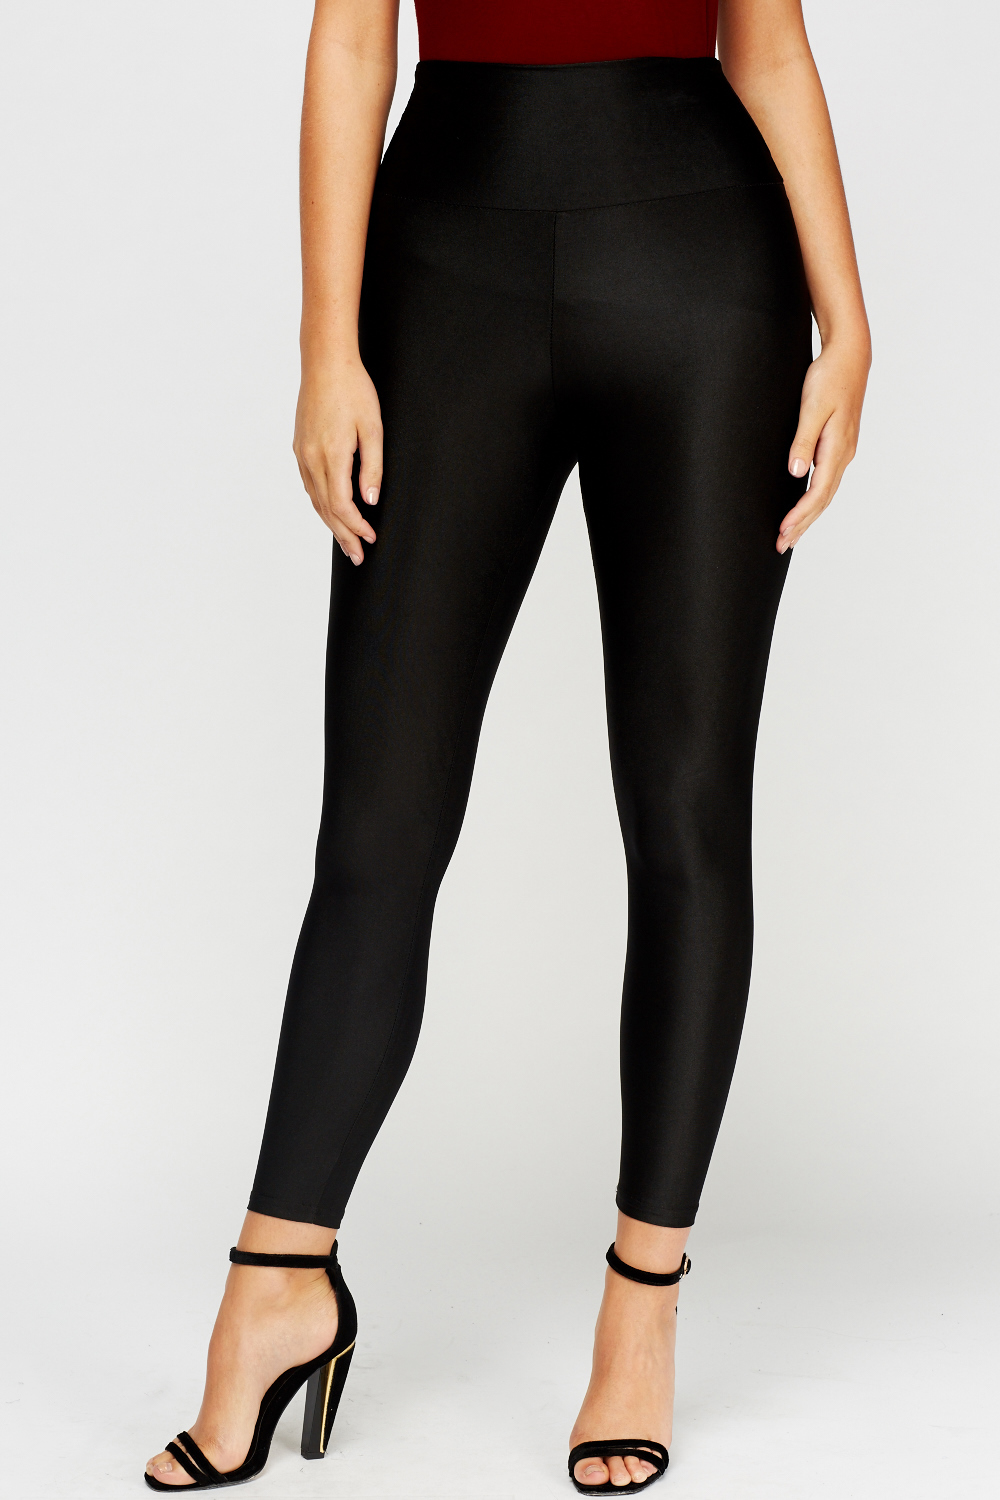 High Waisted Black Disco Pants - Just $7